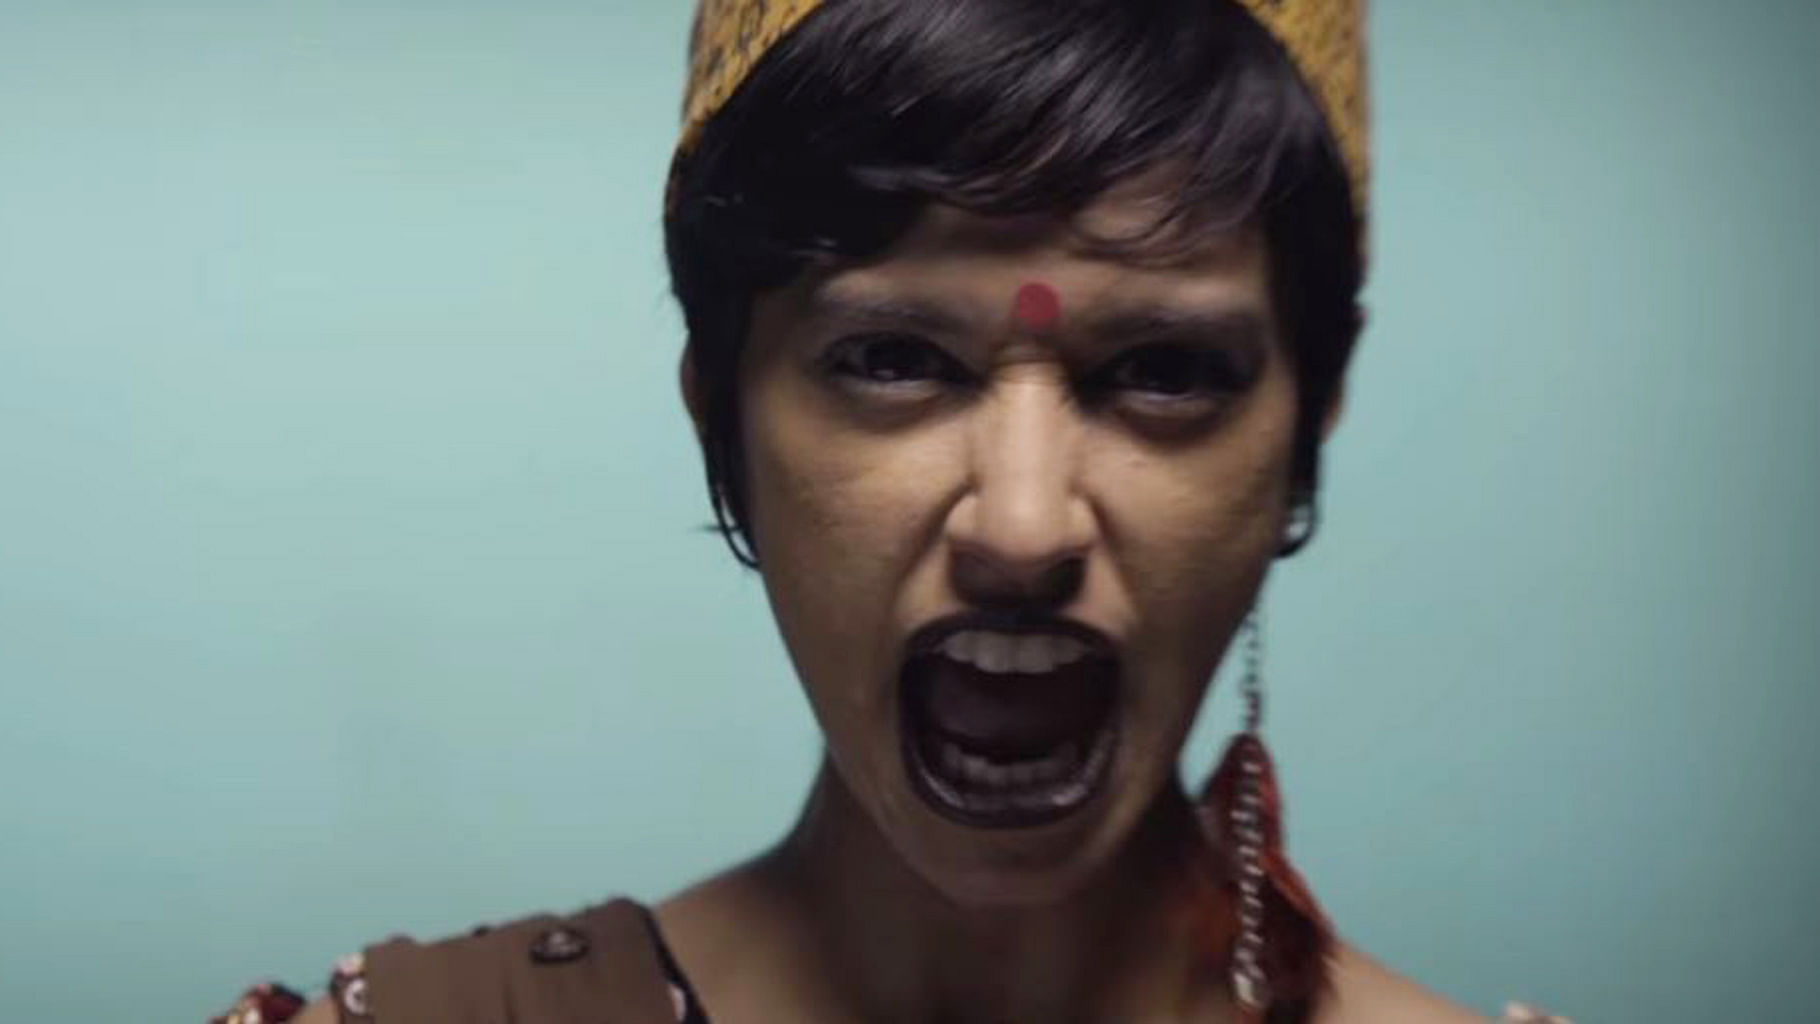 

Ashraf’s rap activisim first came to light when her video<a href="https://www.youtube.com/watch?v=nSal-ms0vcI"> Kodaikanal Won’t! </a>dealt with former employees of Hindustan Unilever’s Kodaikanal mercury manufacturing plant demanded compensation for the permanent health damage. (Photo Courtesy: <a href="https://www.youtube.com/watch?v=aZTld8_fVyg&amp;feature=youtu.be">Youtube/SofiaAshraf</a>)